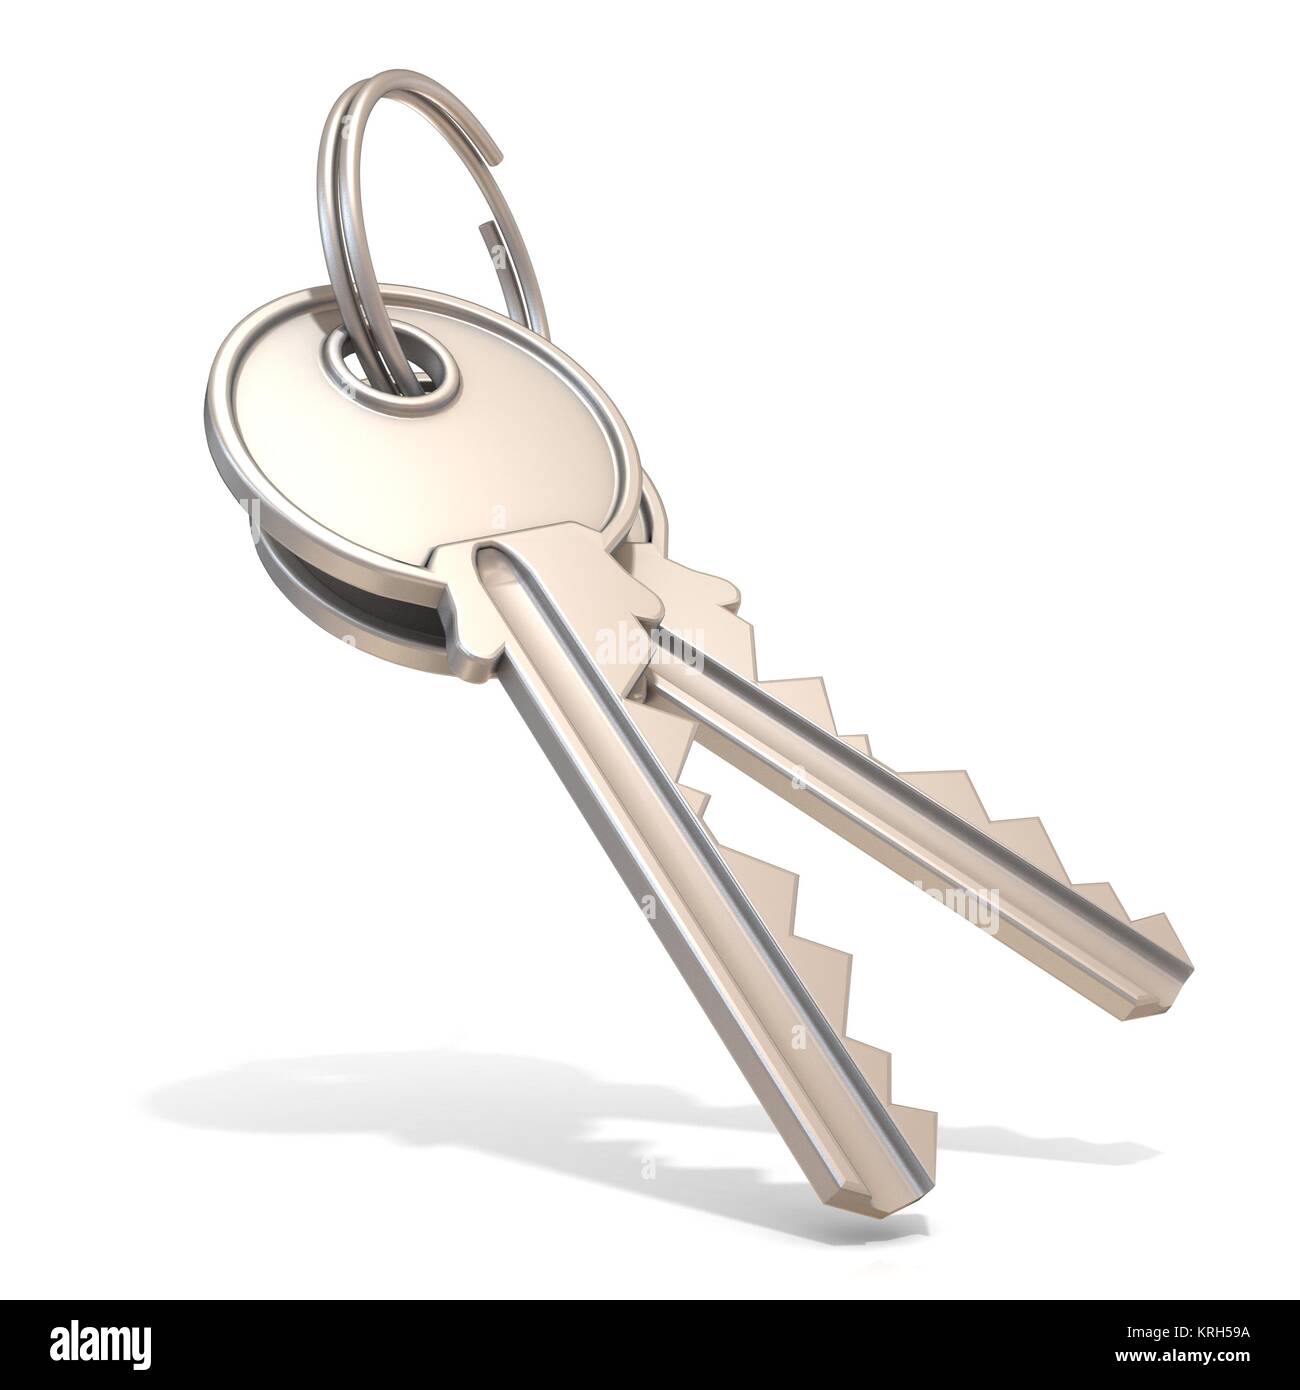 A pair of steel house keys Stock Photo